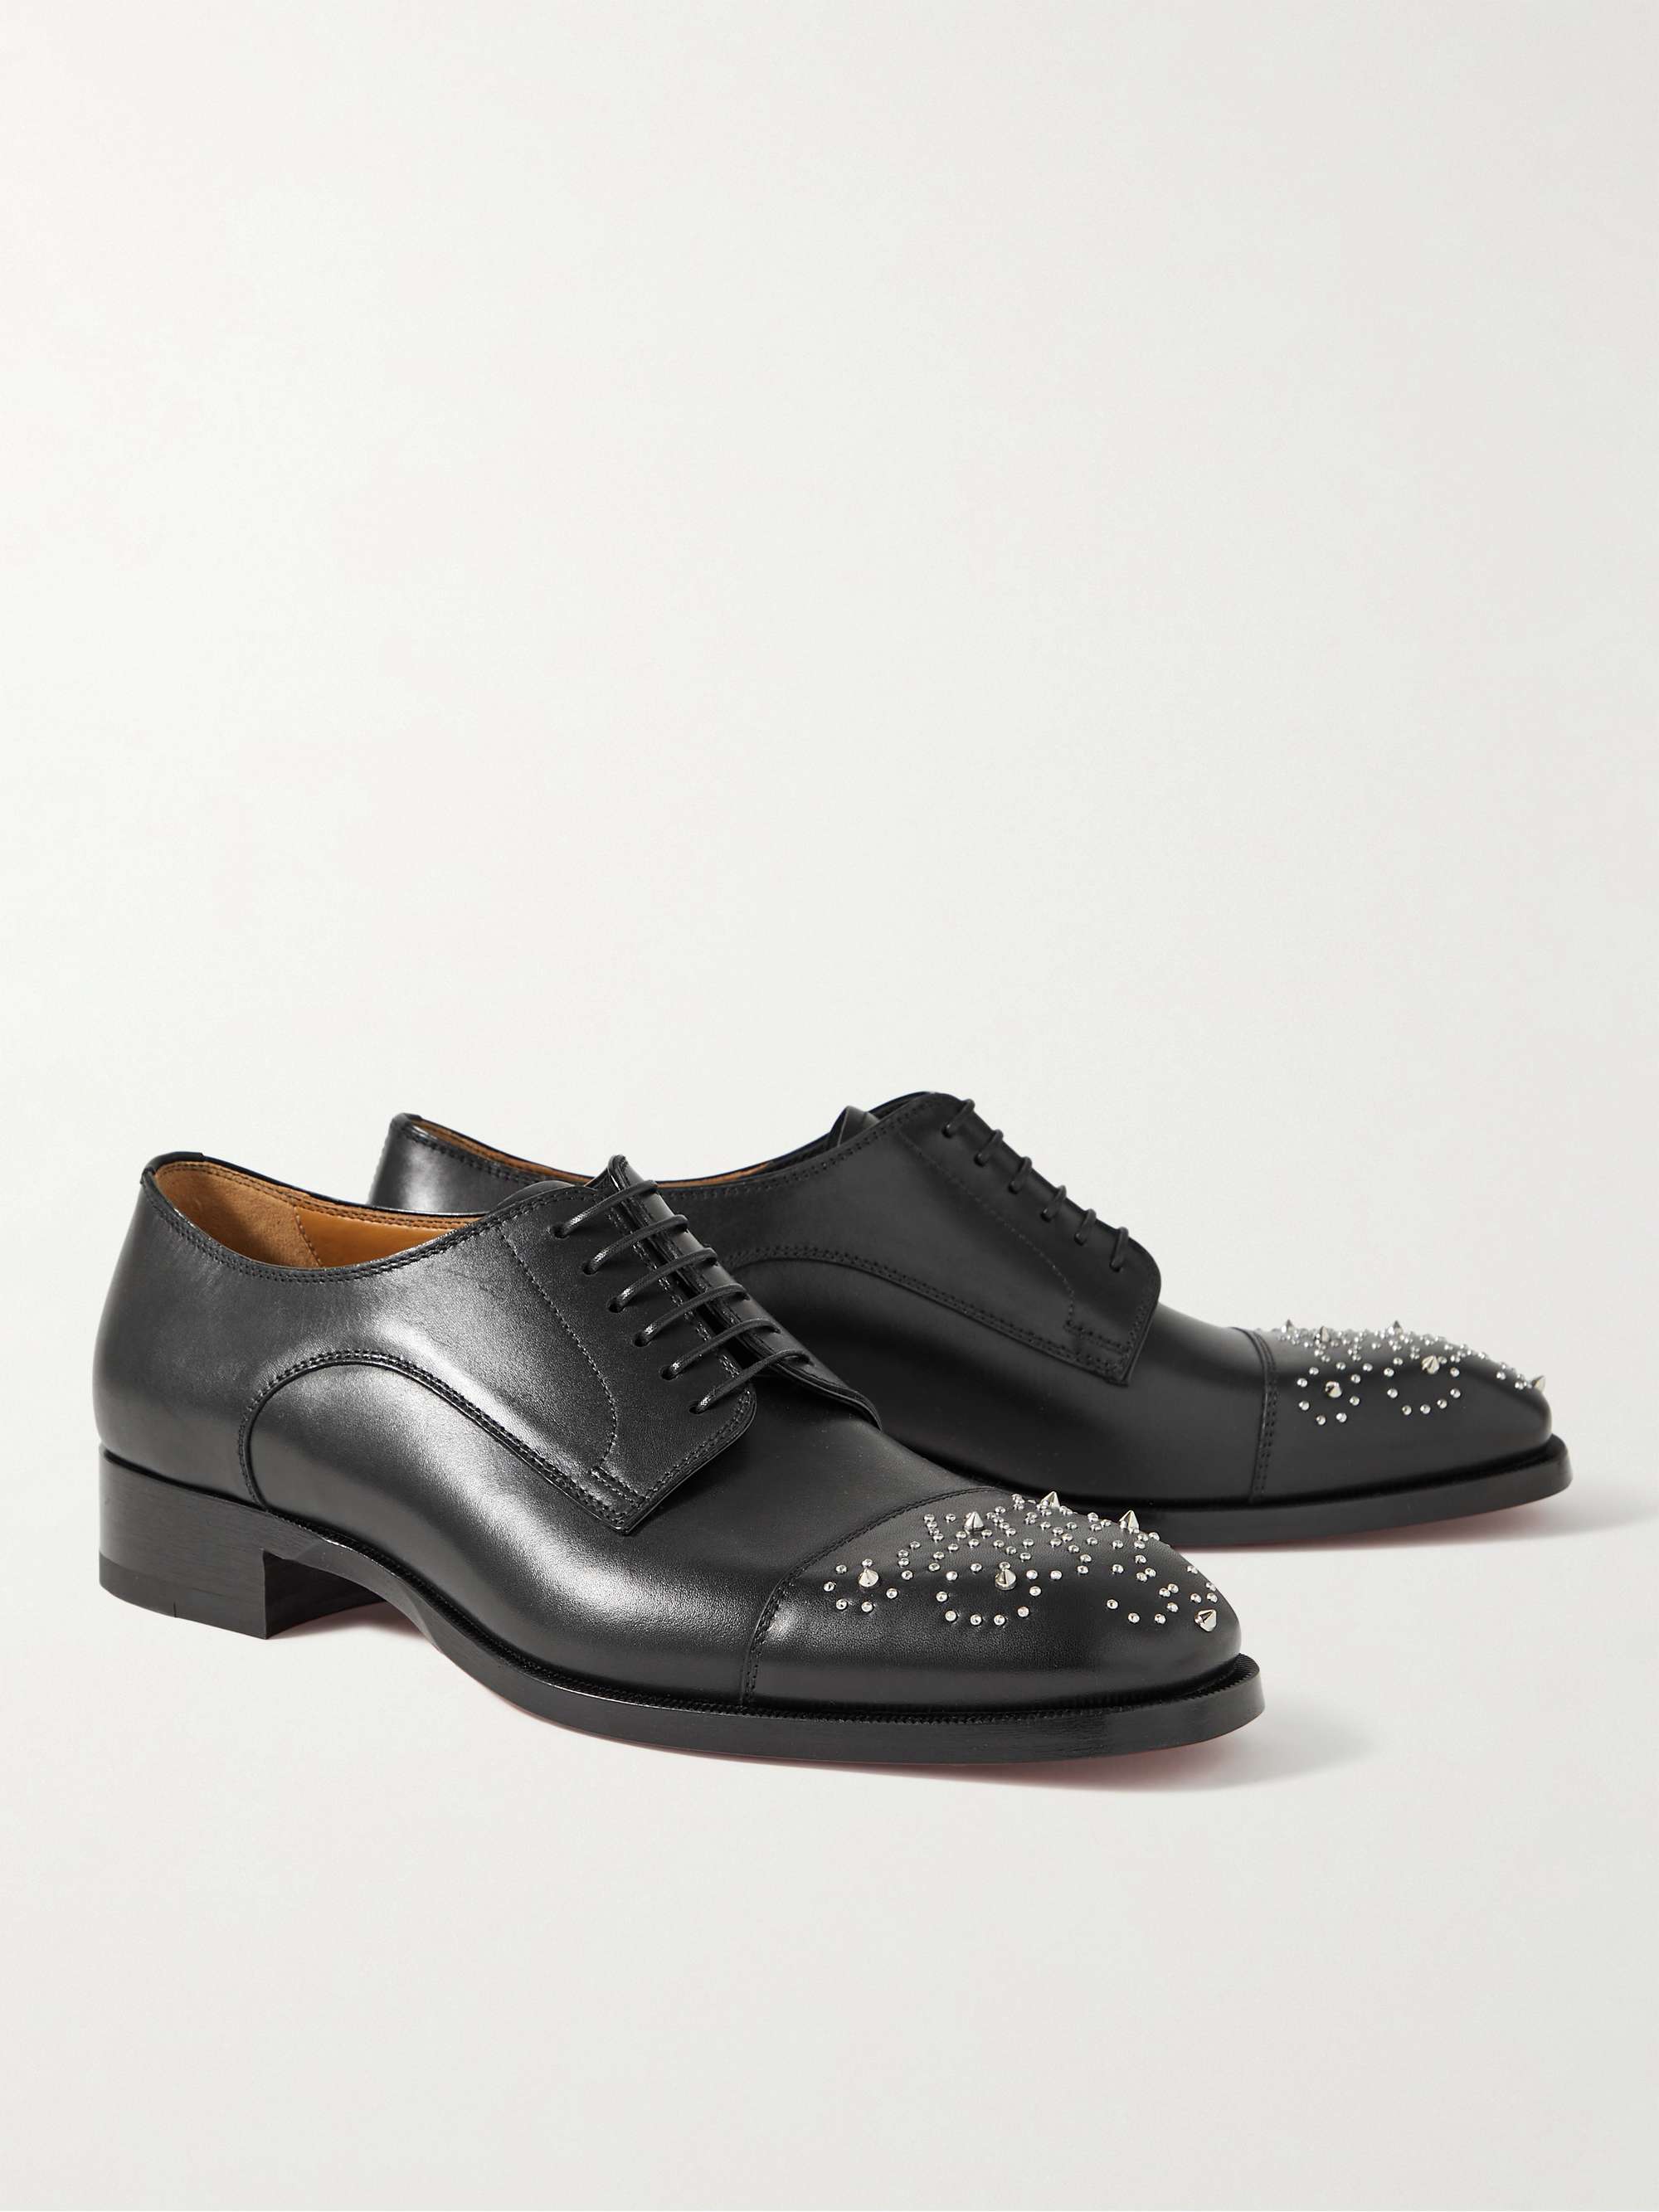 CHRISTIAN LOUBOUTIN Maltese Studded Leather Derby Shoes